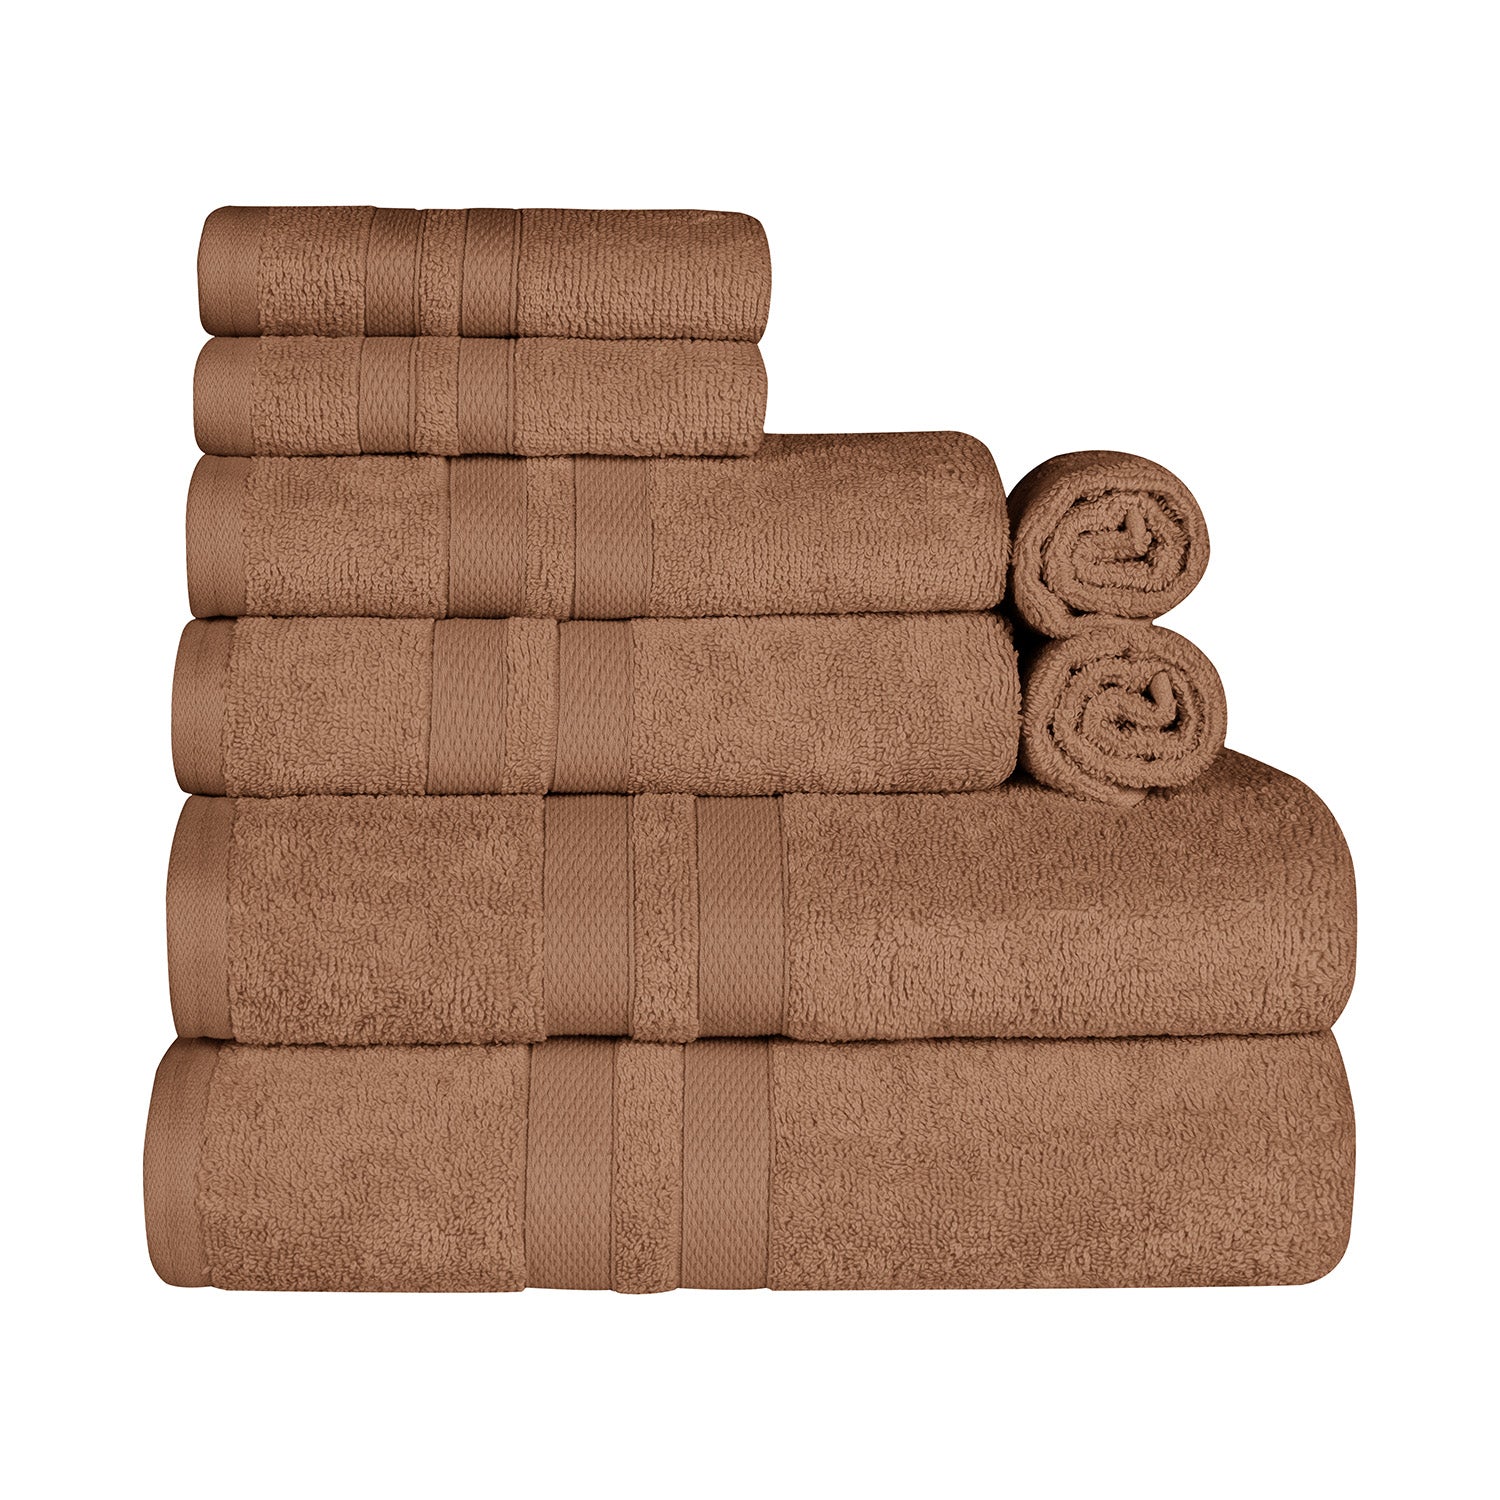 Superior Ultra Soft Cotton Absorbent Solid Assorted 8-Piece Towel Set - Chocolate